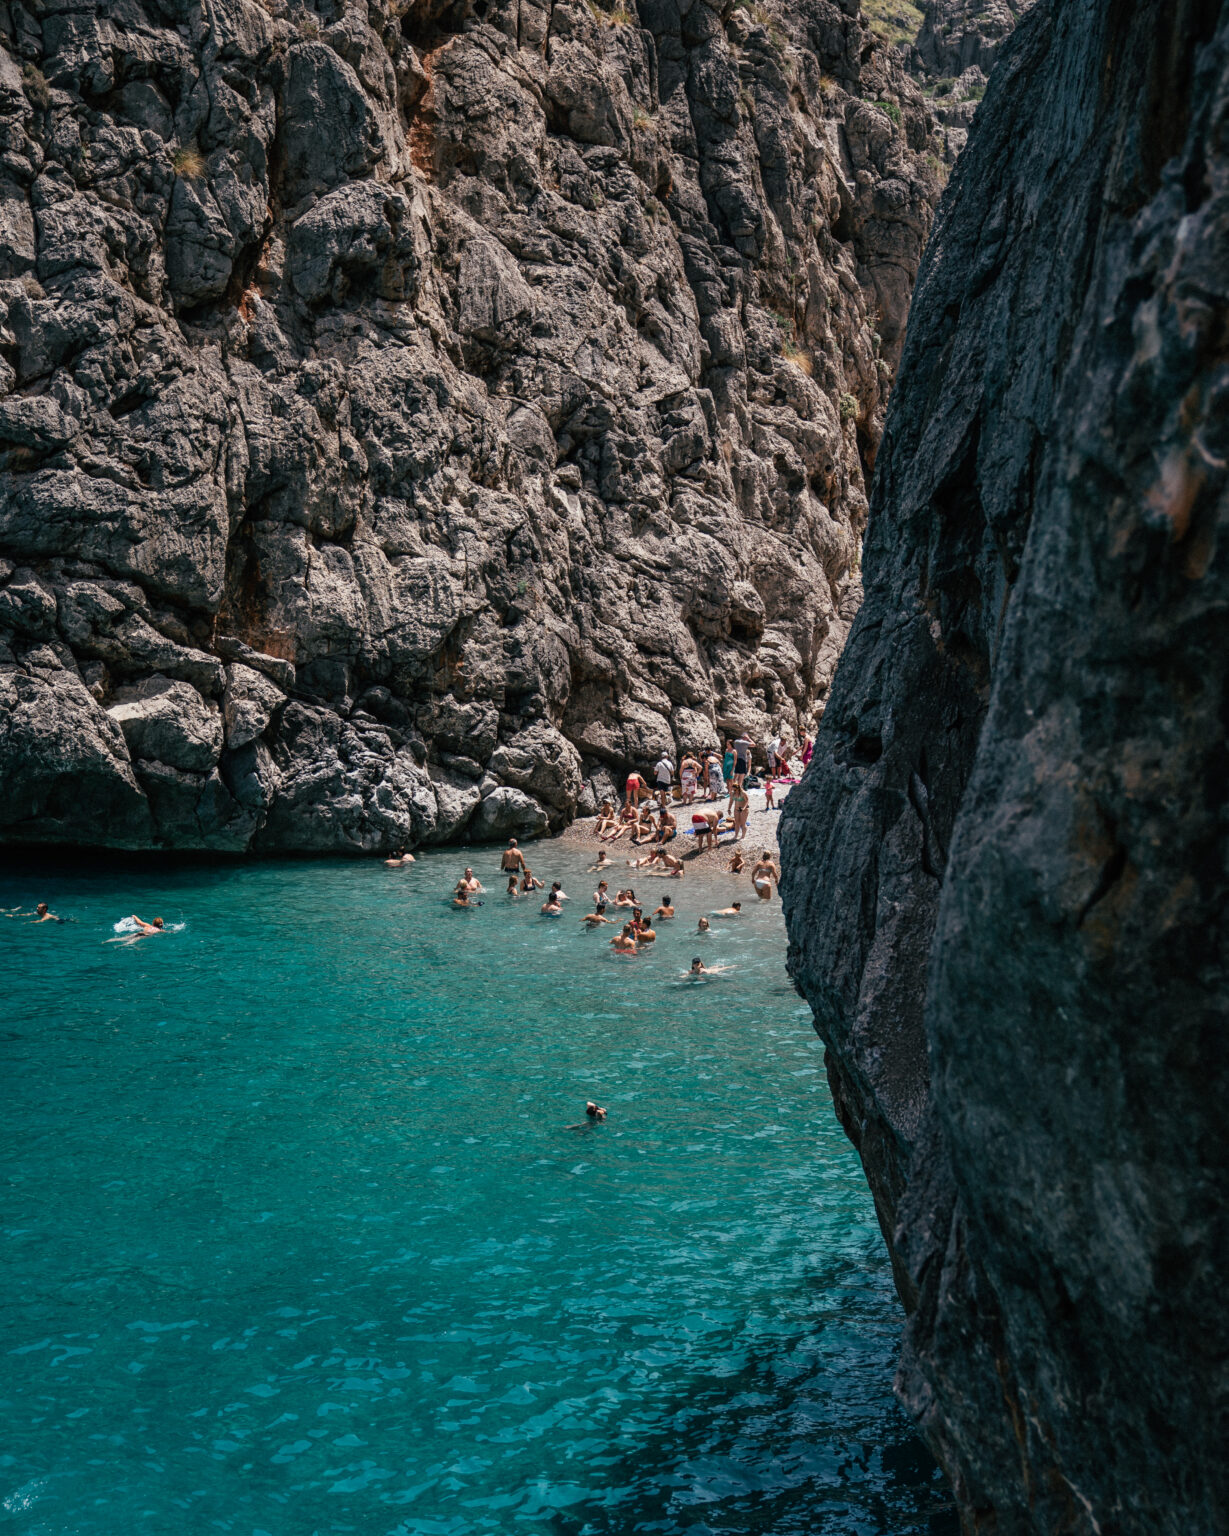 Mallorca, Spain: The Ultimate Guide to the Balaeric Island Paradise